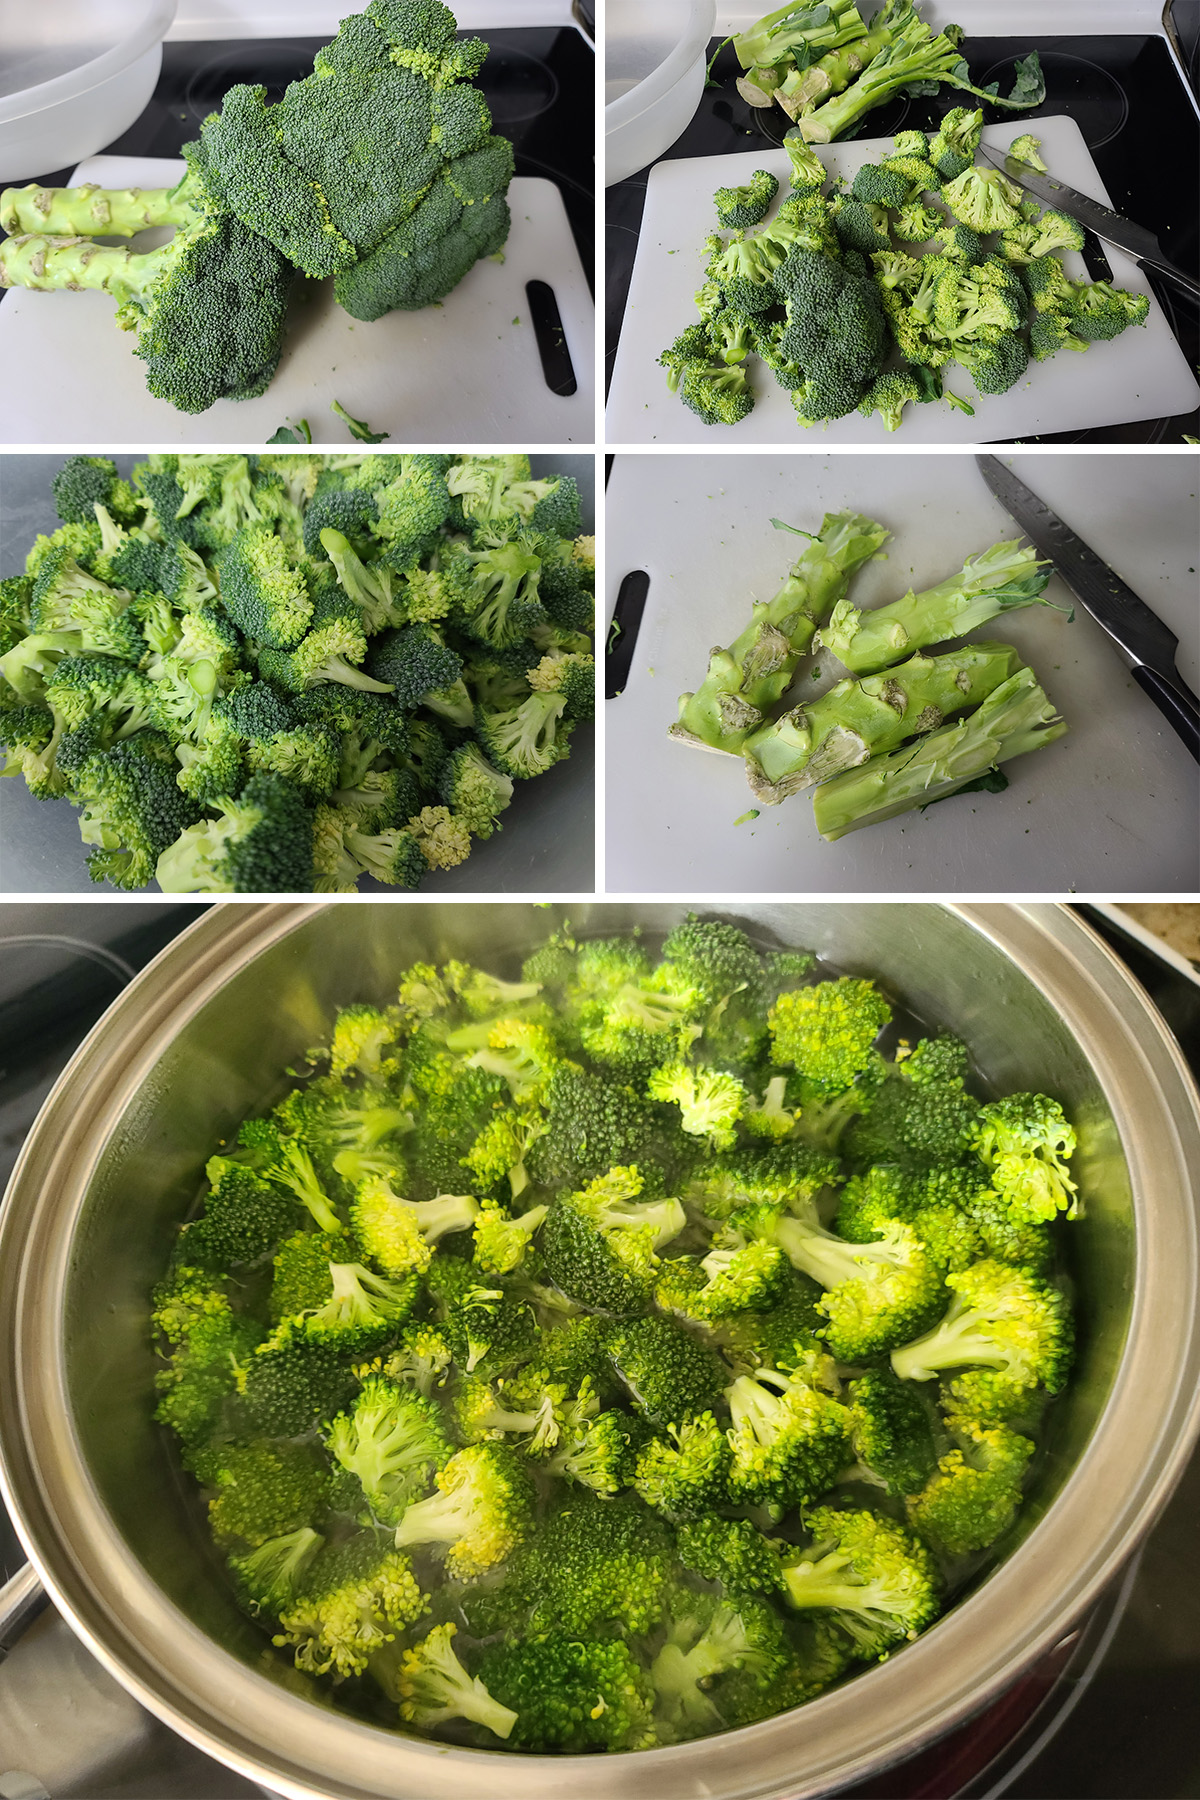 Broccoli being chopped and put in a pot.